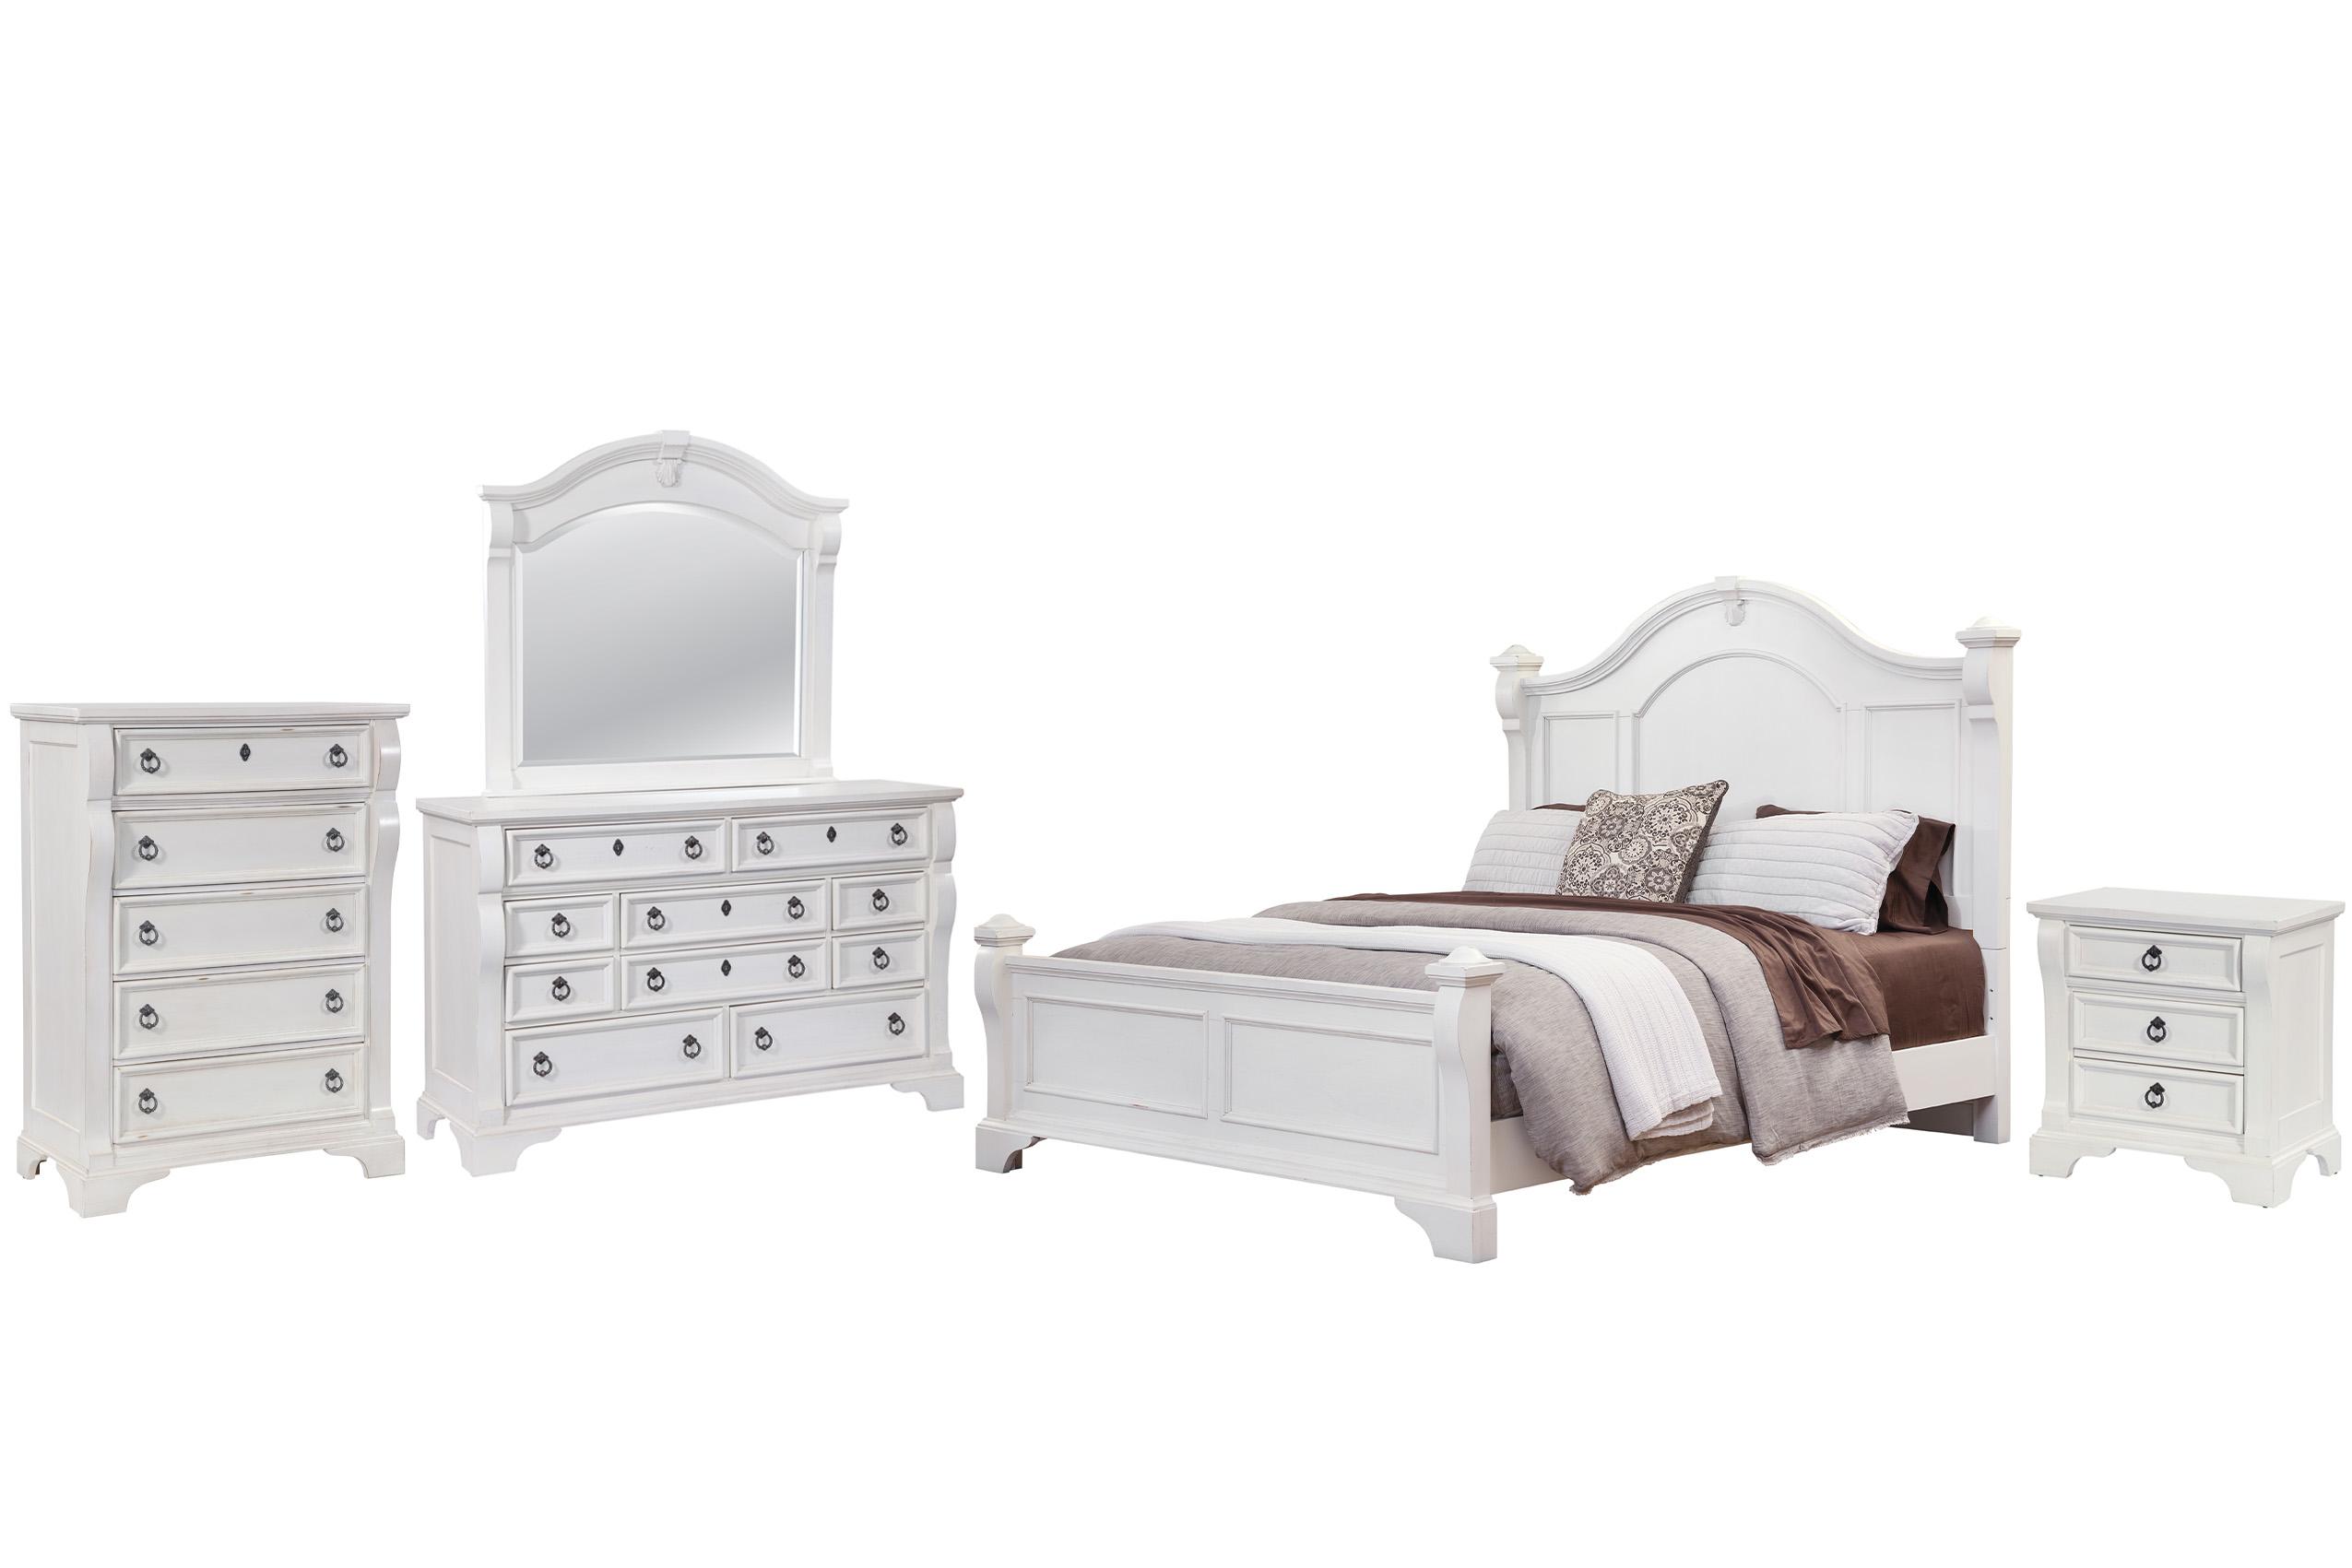 Classic, Traditional, Cottage Poster Bedroom Set HEIRLOOM 2910-50POS 2910-QPOPO-5PC in White 